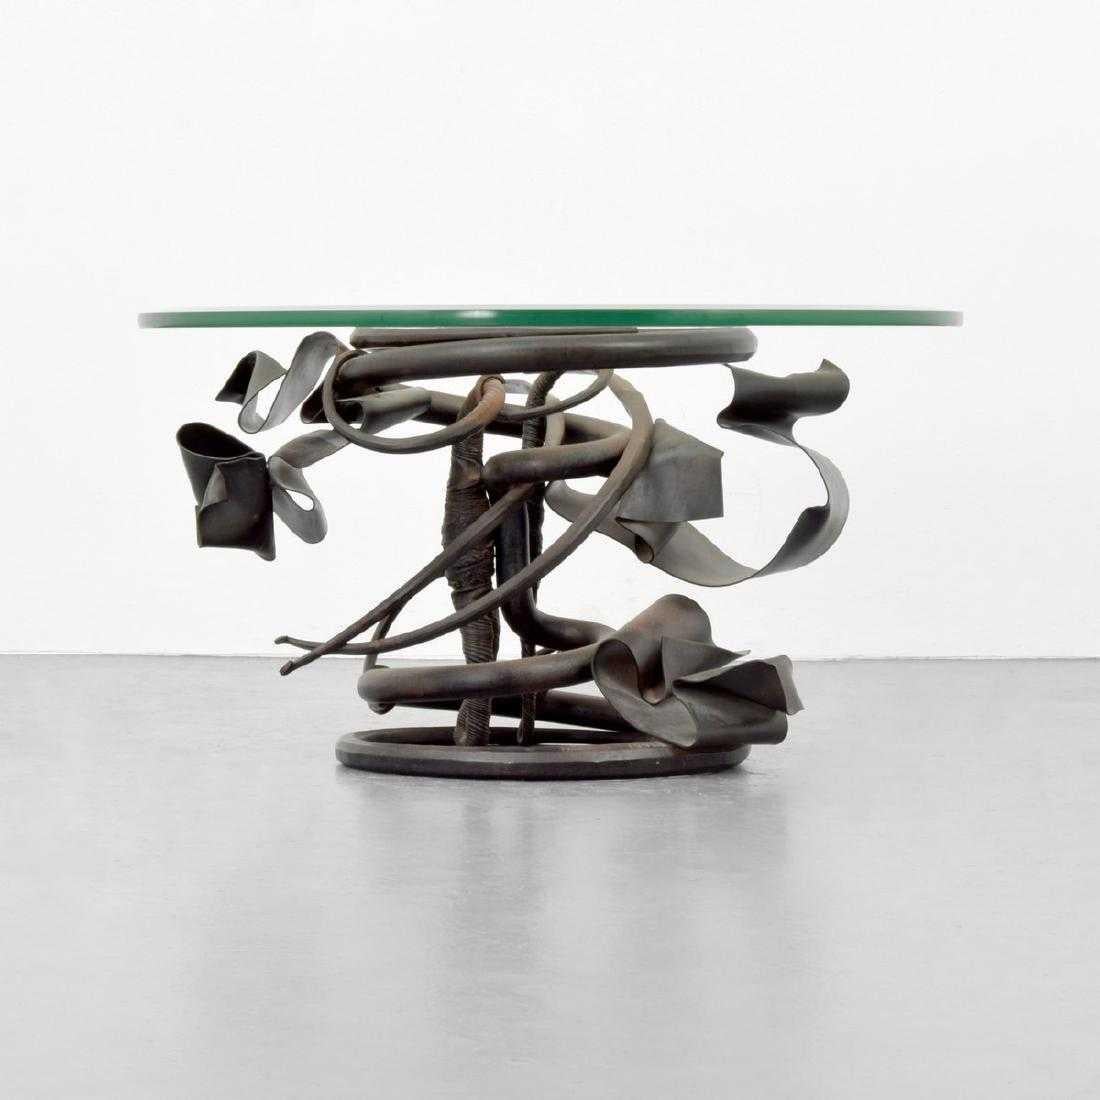 Coffee table by Albert Paley (b. 1944). Table is from an edition of fifteen. Provenance: Collection of Donna Schneier, Manalapan, Florida.

Markings: Signed; 1991

Materials: Forged steel, glass.
 